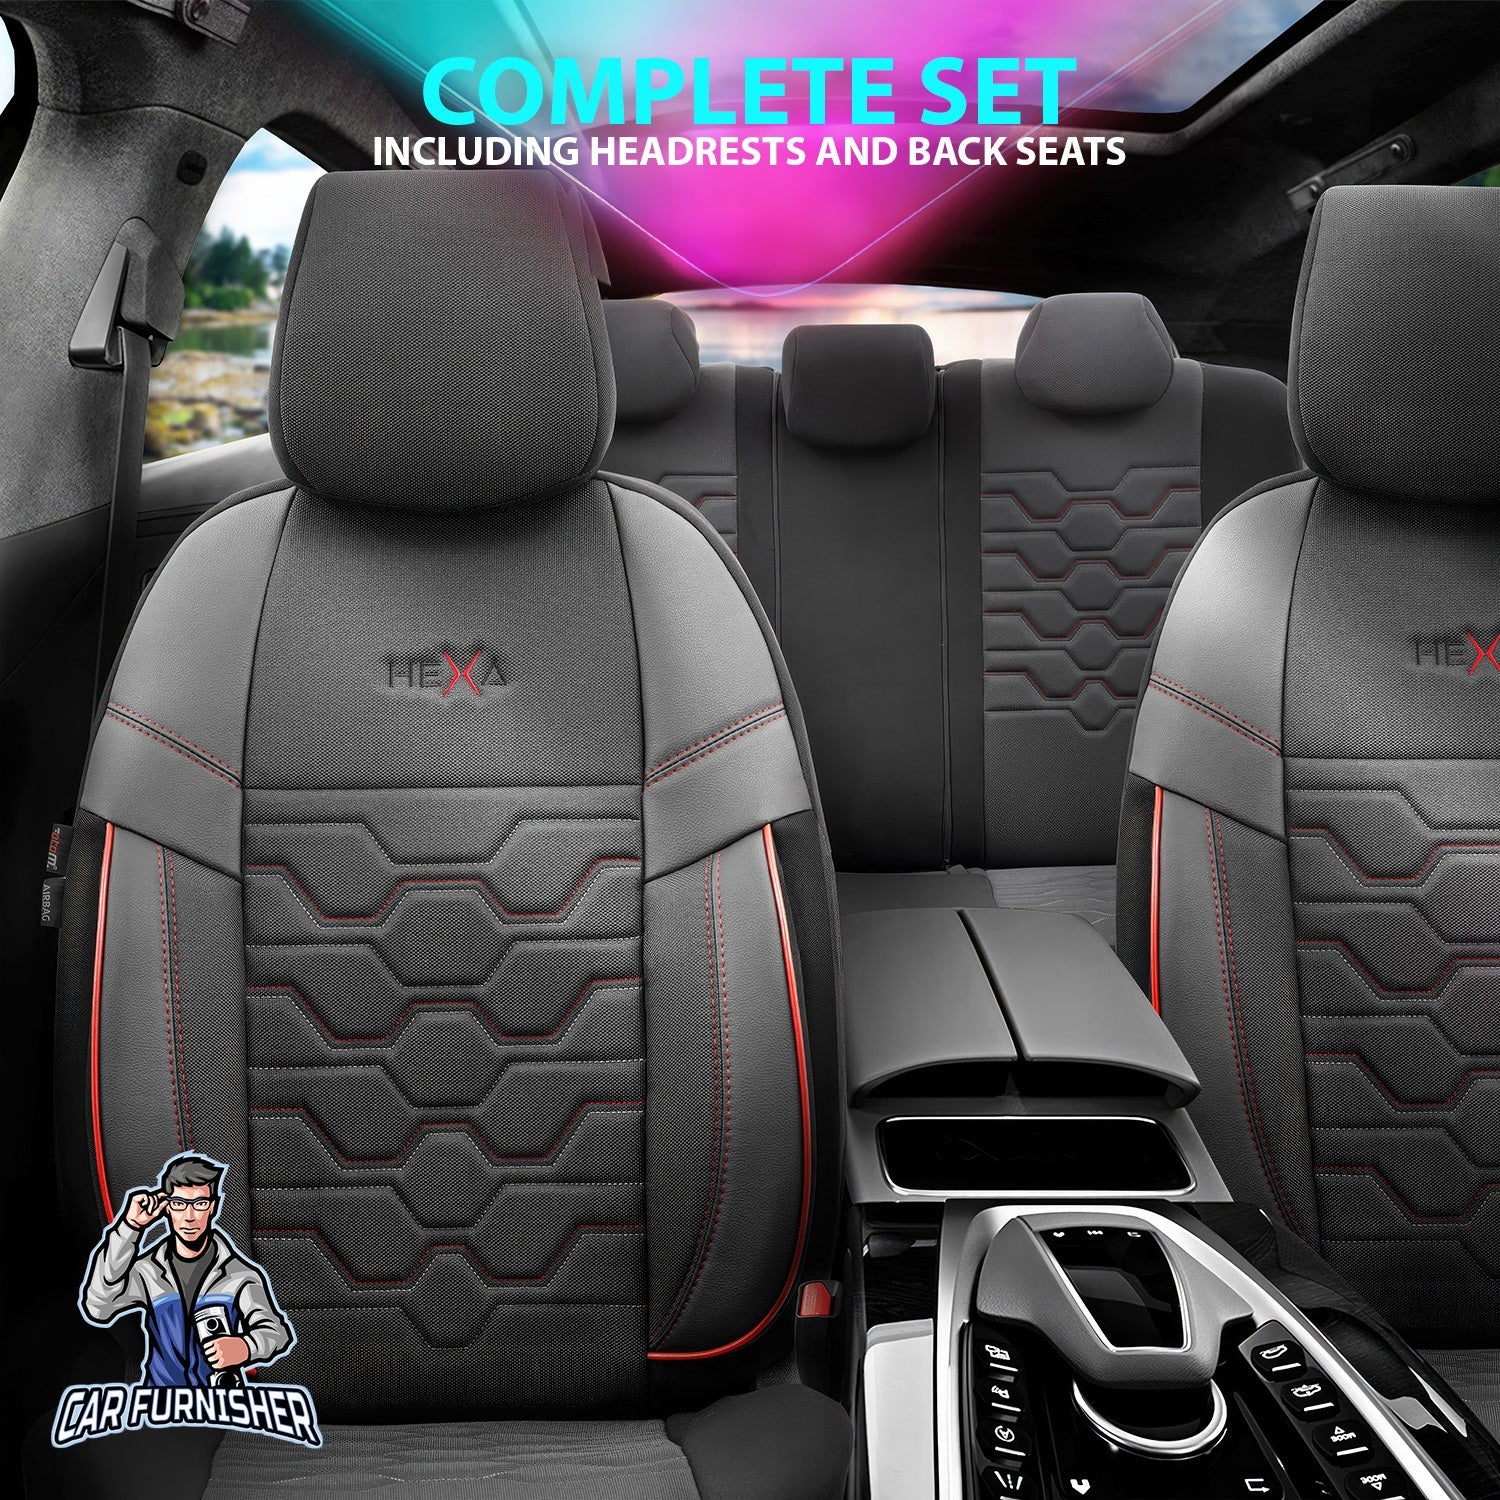 Mercedes 190 Seat Covers Hexa Design Dark Red 5 Seats + Headrests (Full Set) Leather & Jacquard Fabric